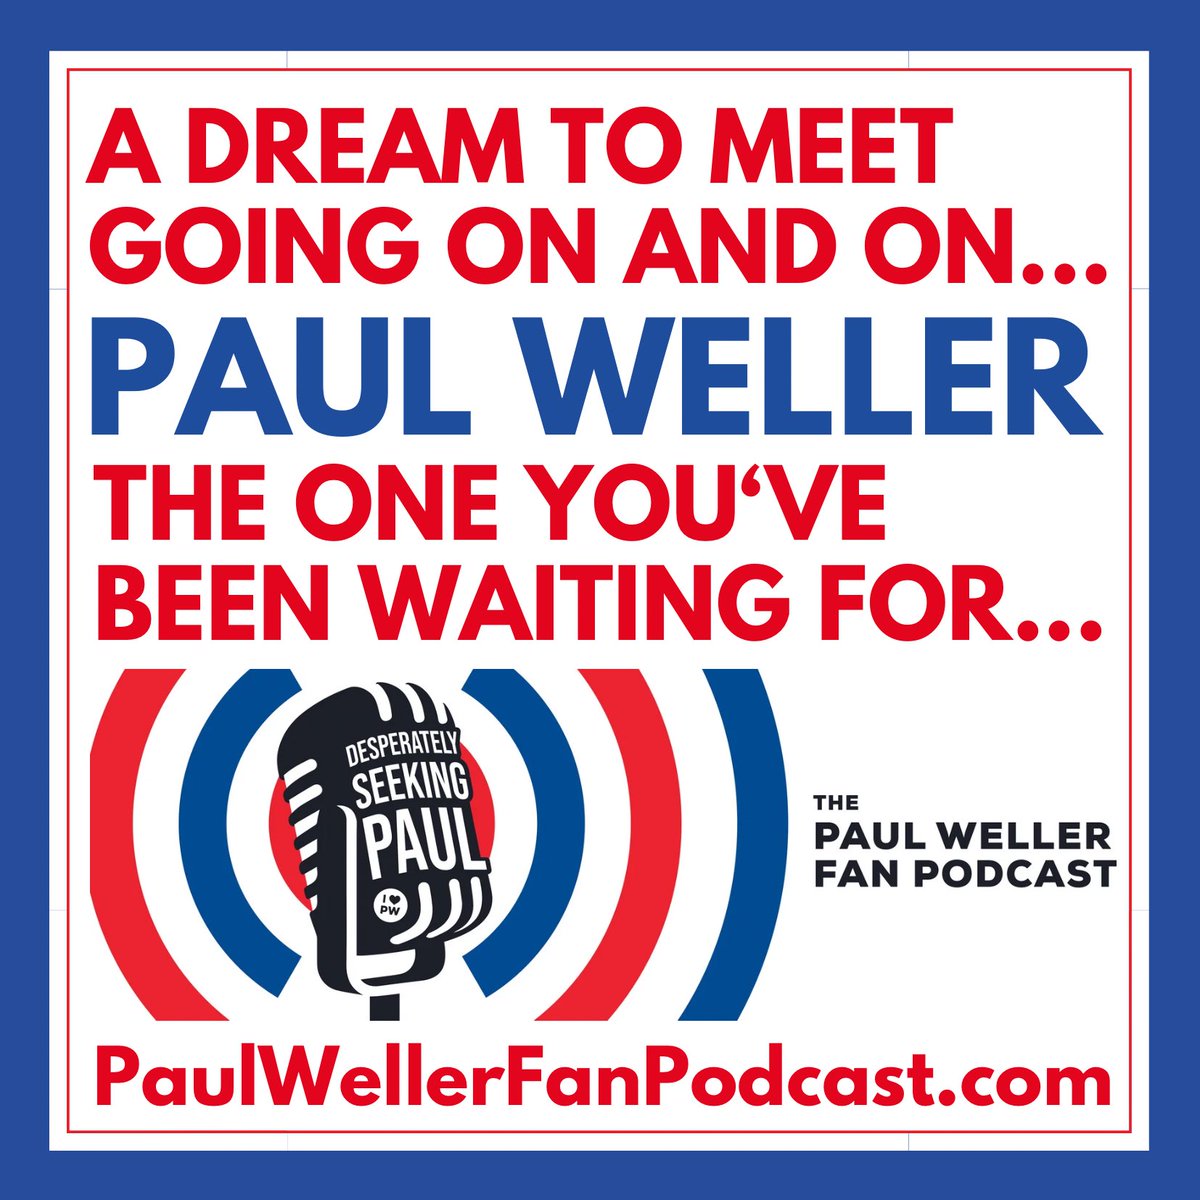 The Epic Conclusion - Episode 180 is now live wherever you get your podcasts. @ApplePodcasts @spotifypodcasts @YouTube and more…. 2 hours recorded at @paulwellerHQ with Paul as you’ve never heard him before…. Read my notes, find my store & listen at paulwellerfanpodcast.com/episode-180-pa…